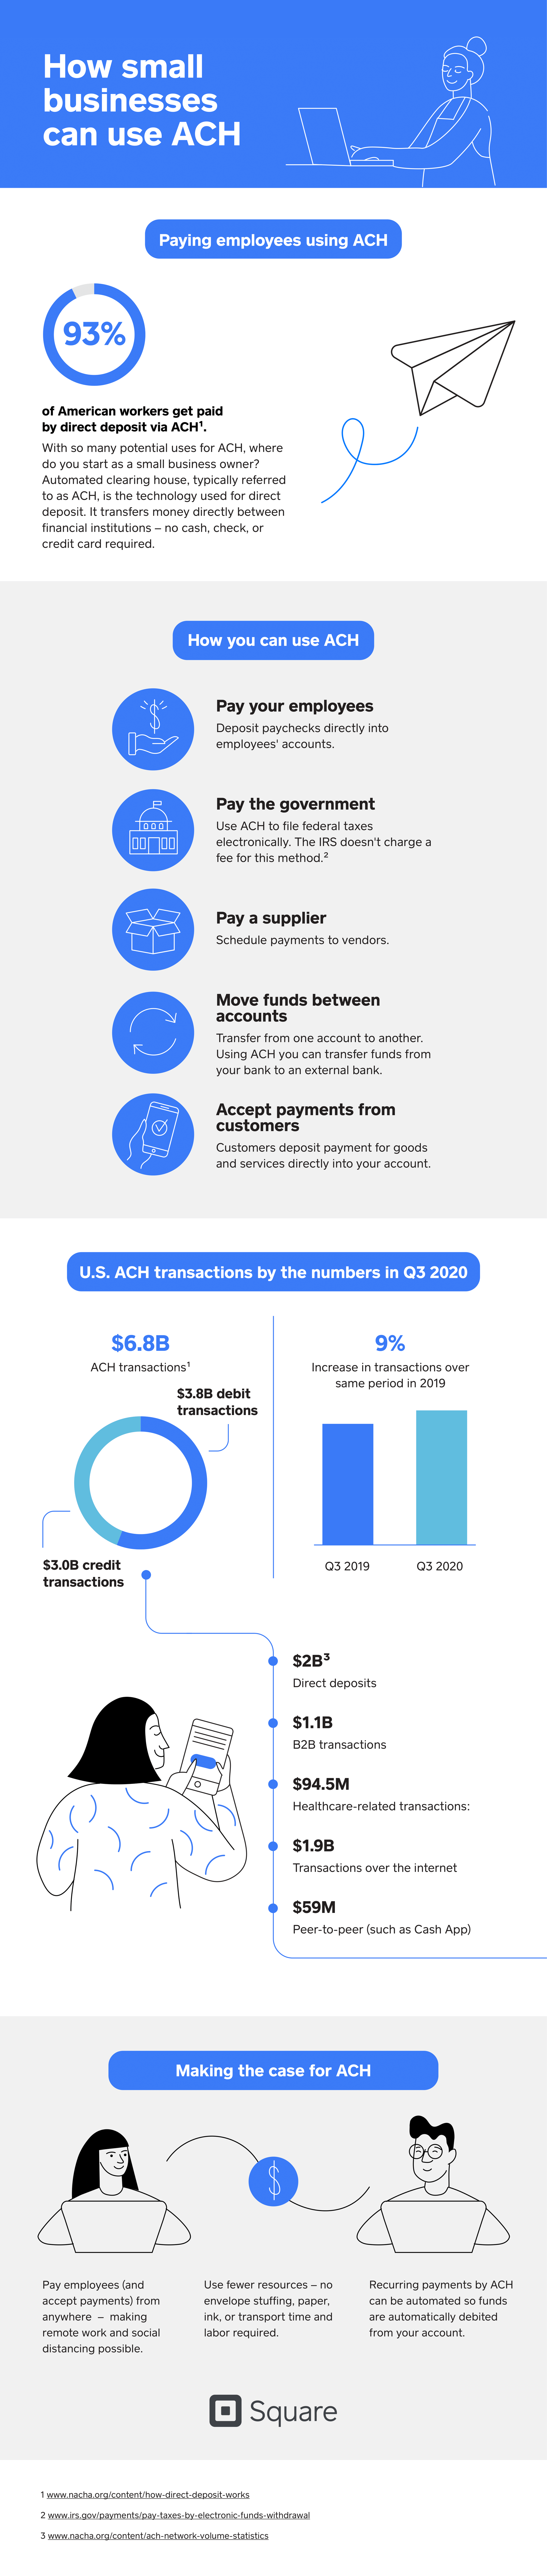 Infographic: How small businesses can use ACH